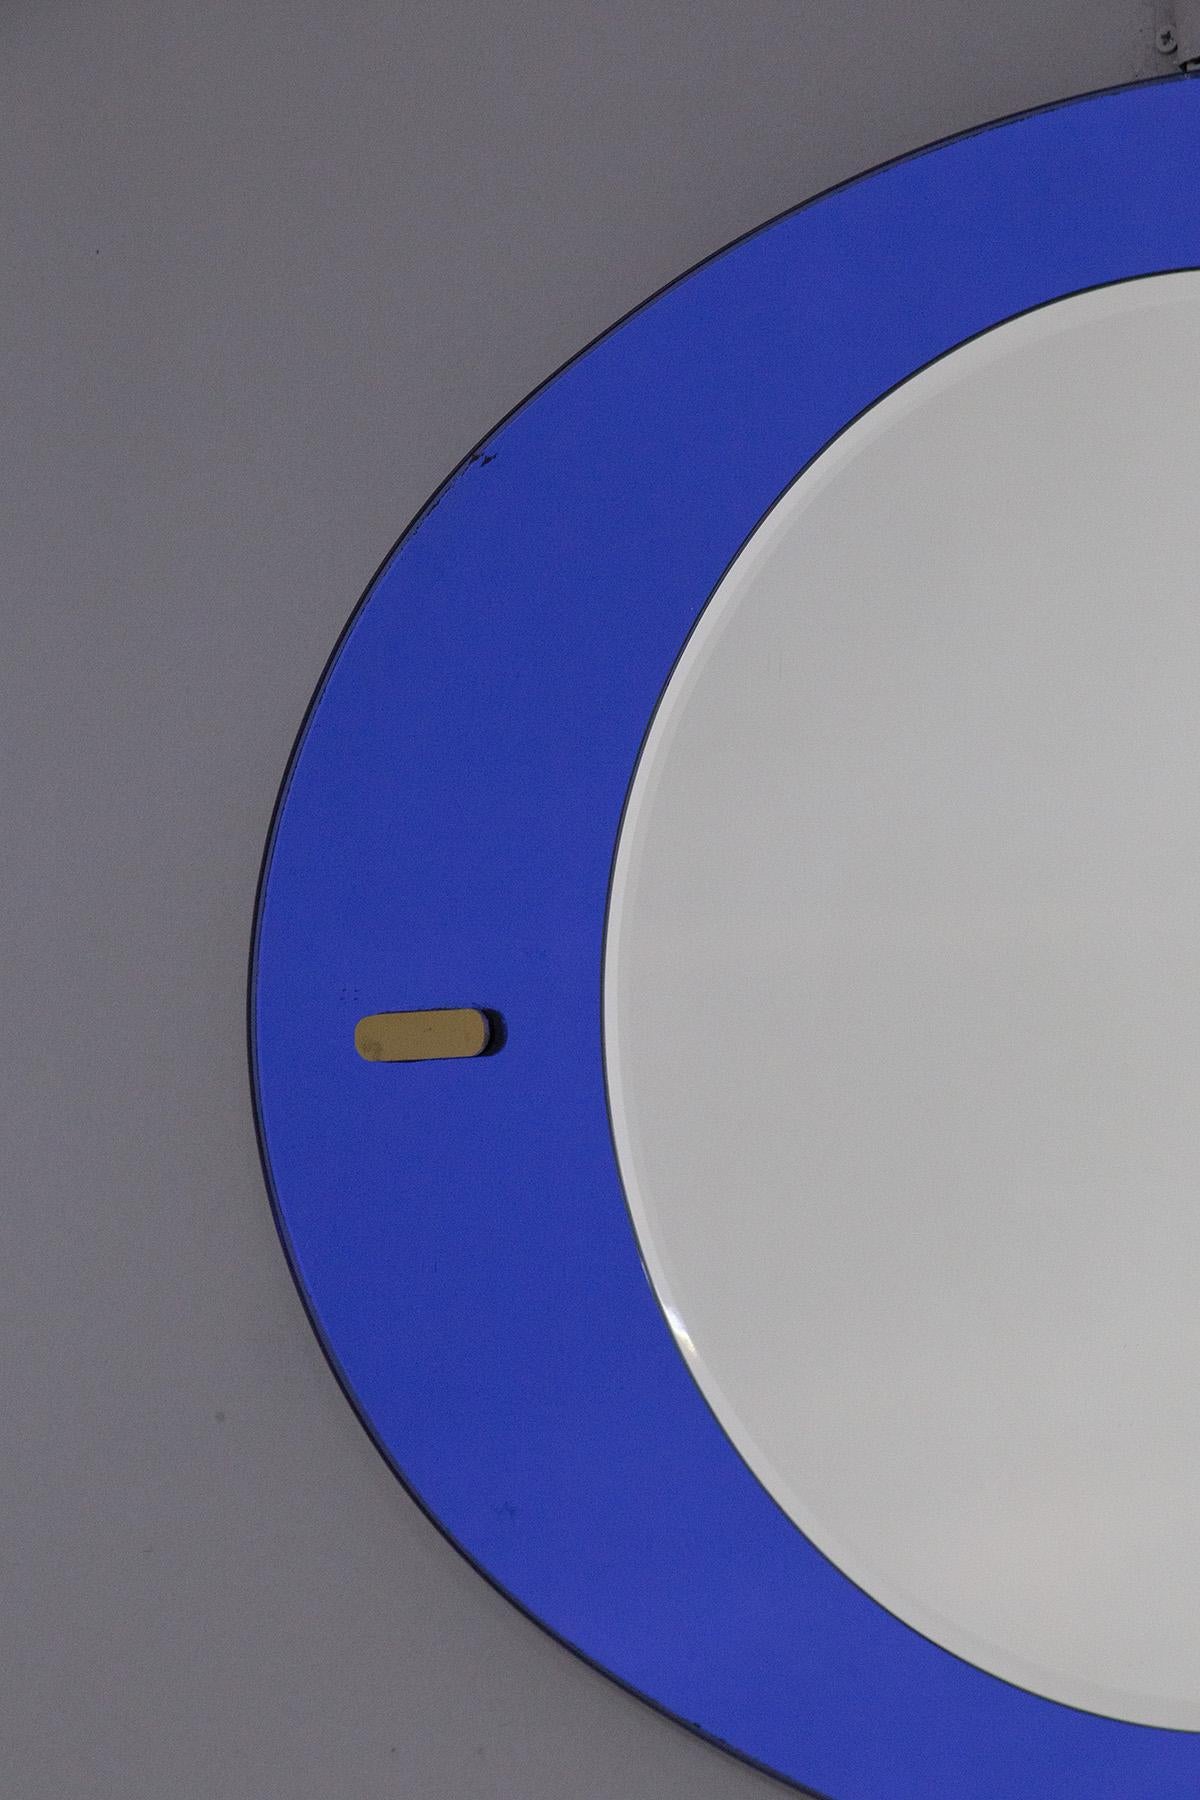 Beautiful oval wall mirror designed and made in the 1950s in the style of Fontana Arte, given the colours and shapes.
Free shipping is included in the price.
The mirror has a very eclectic oval shape that frames the central round mirror. The frame